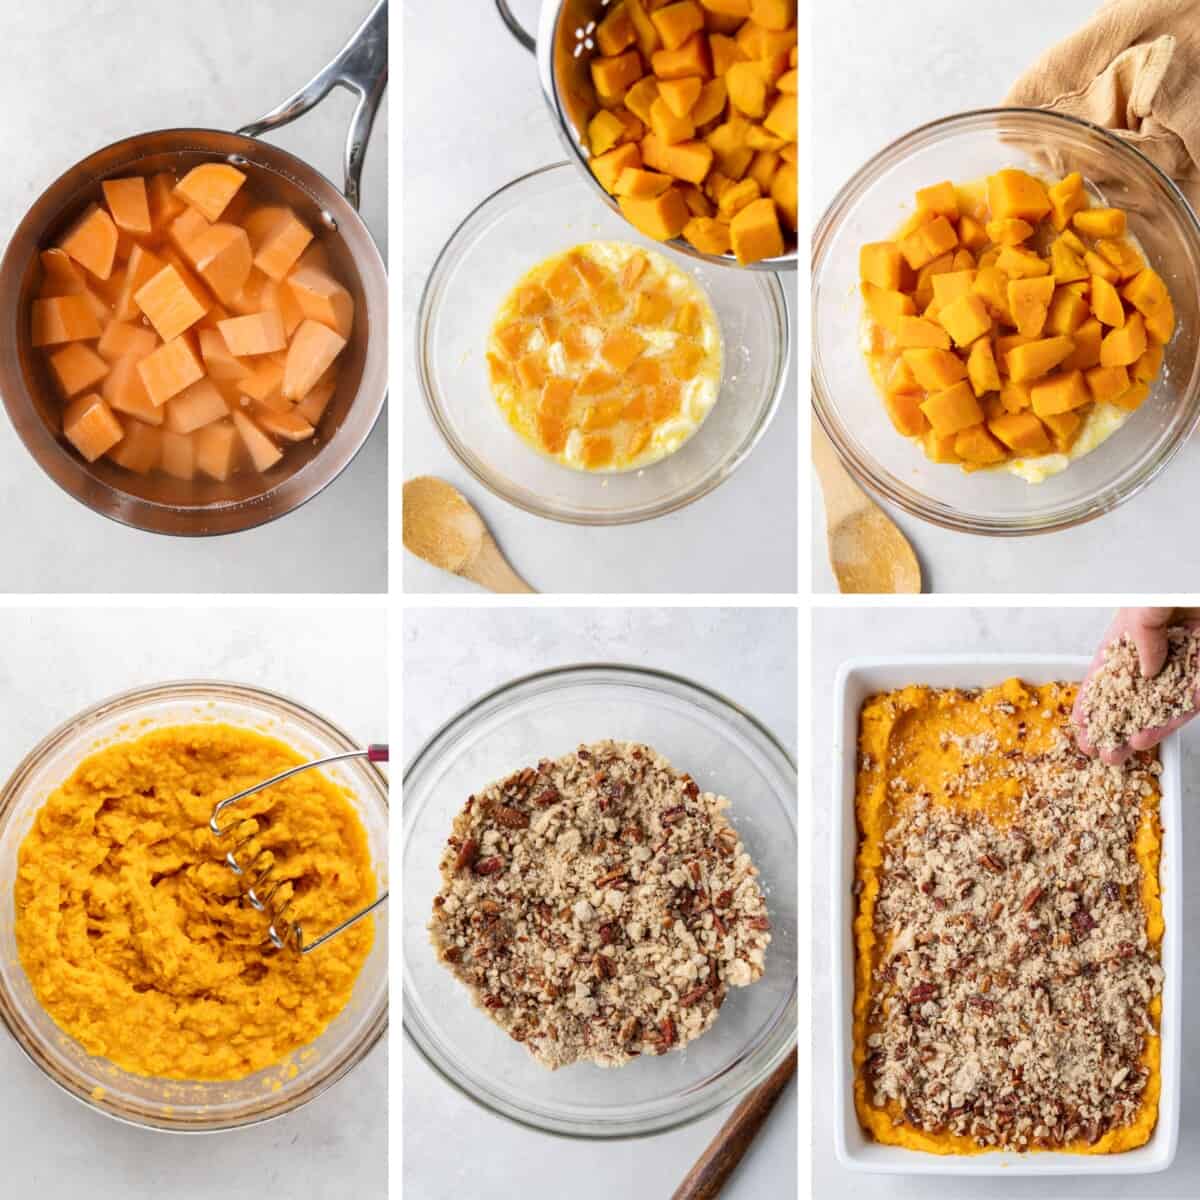 A grid of process photos showing the individual steps in preparing a sweet potato casserole.